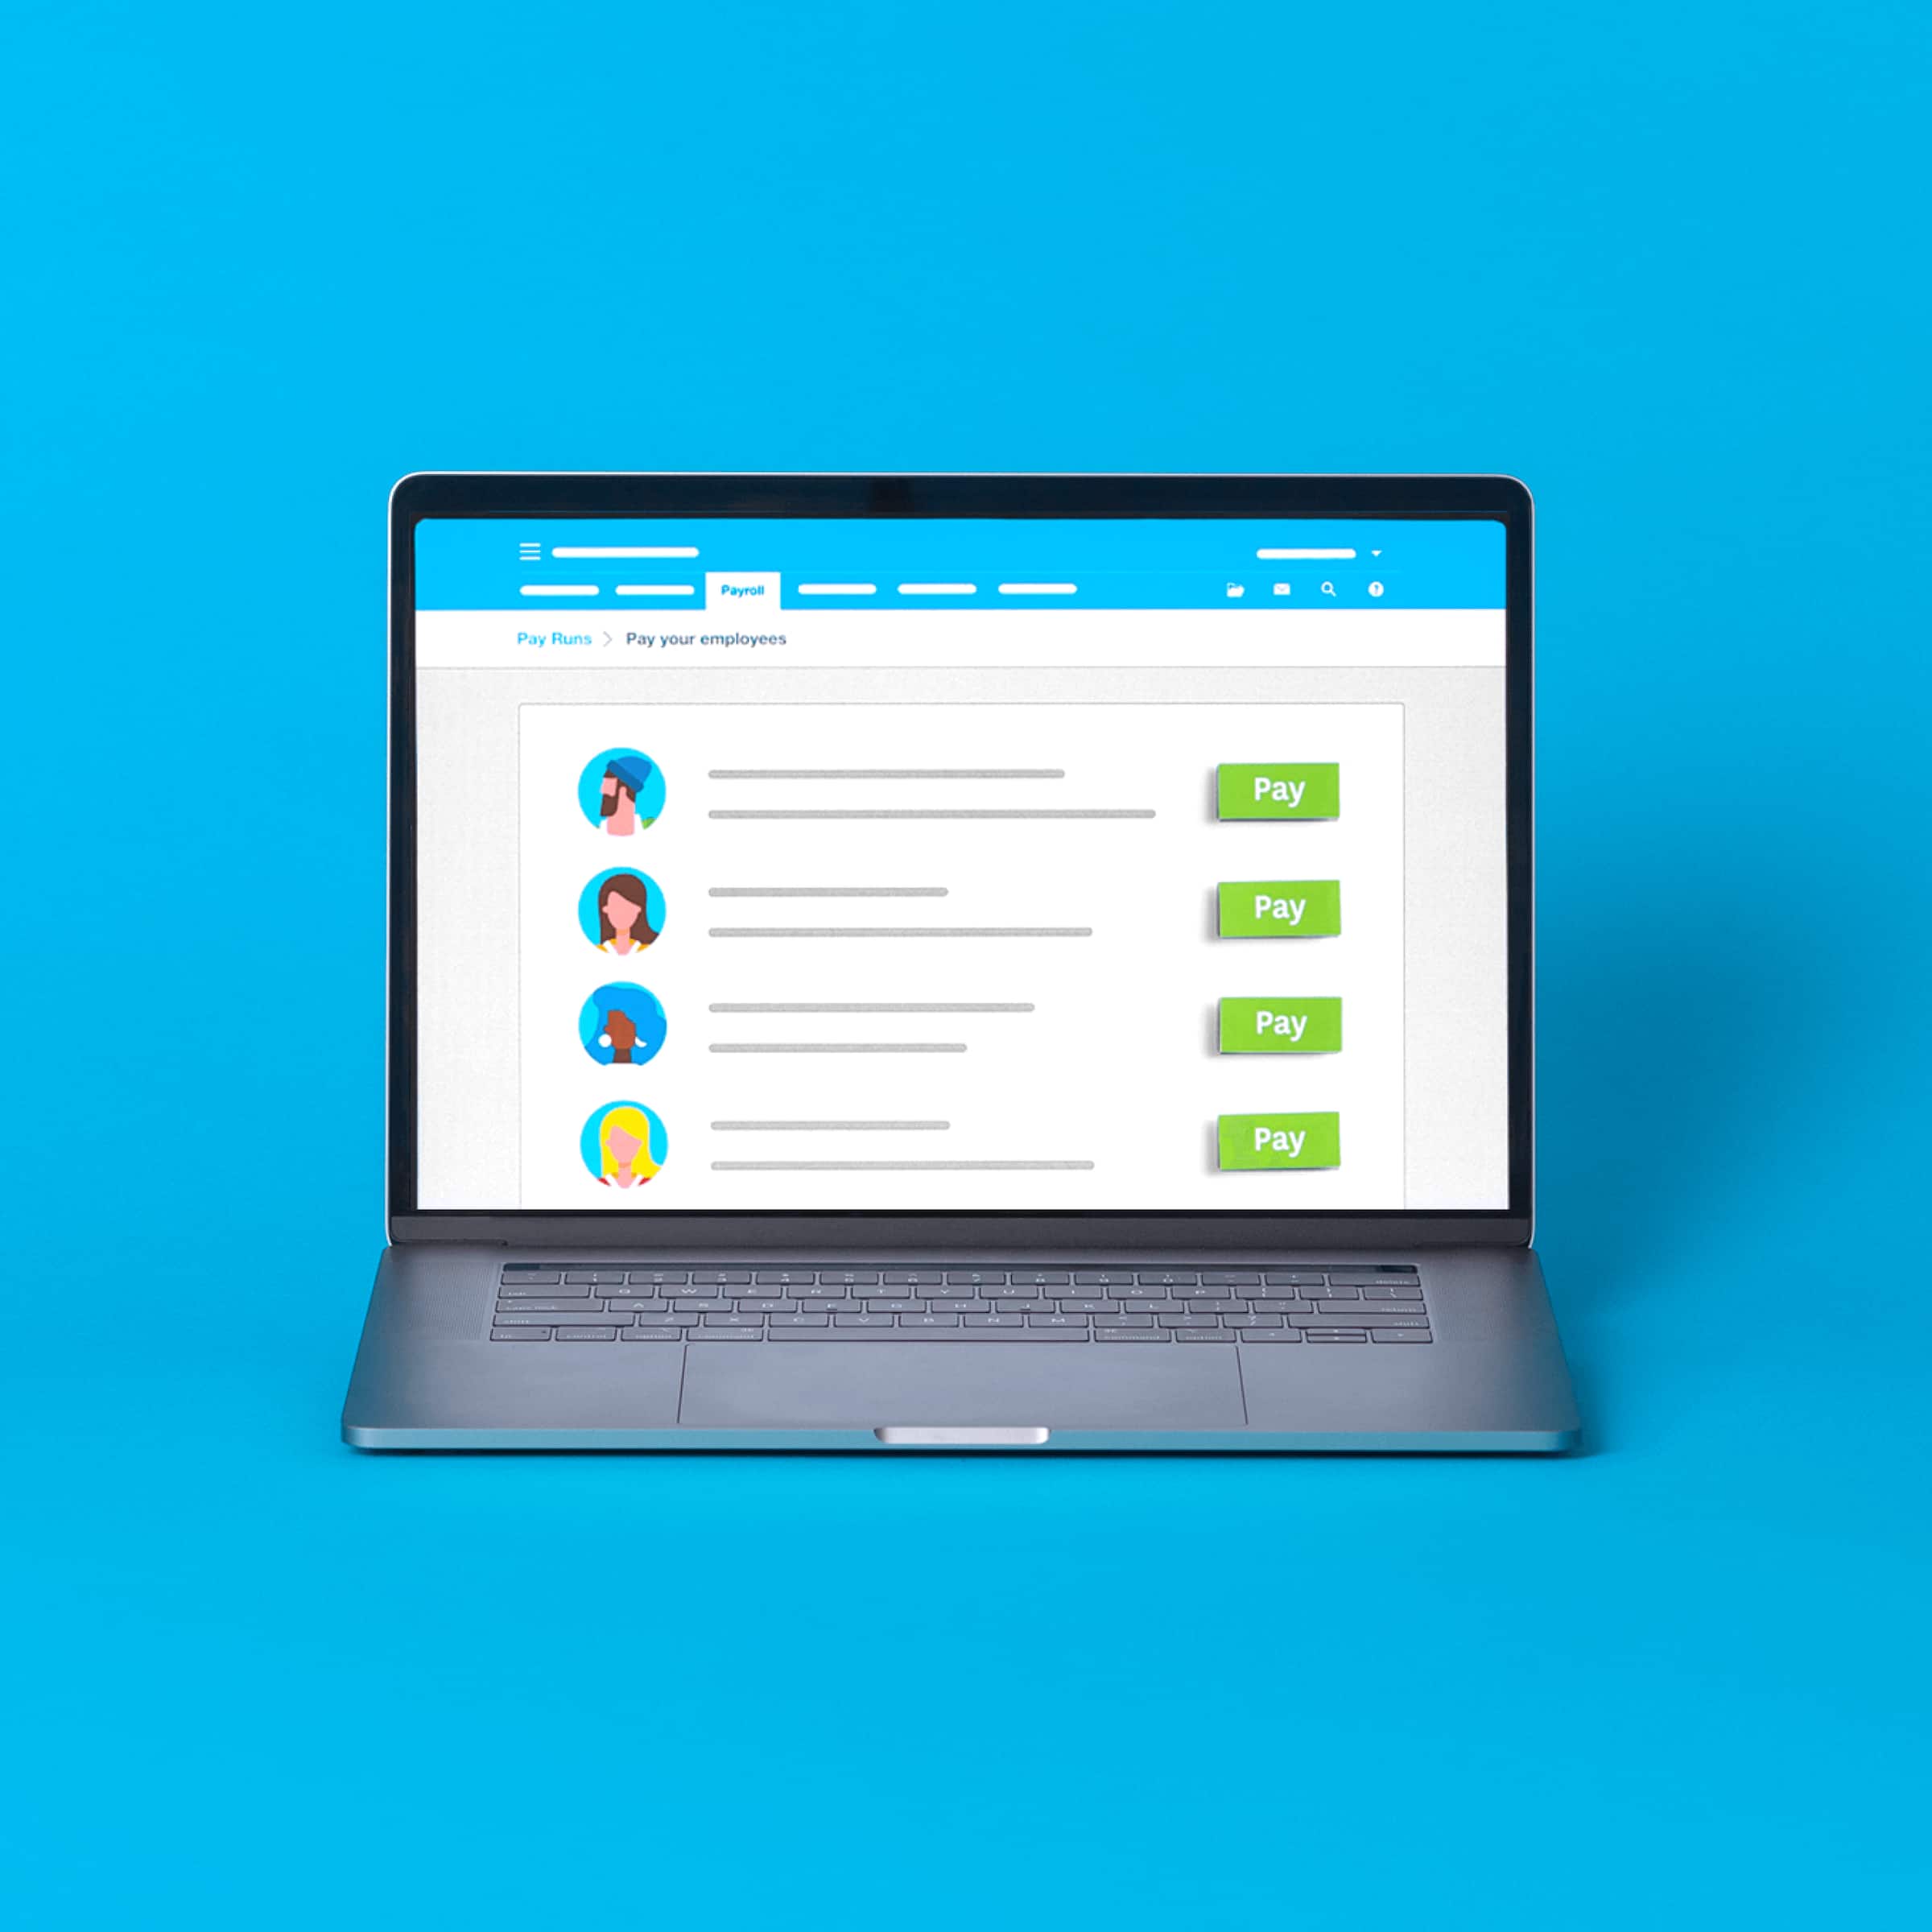 Xero payroll software for small business displays who can be selected to pay in this pay run.